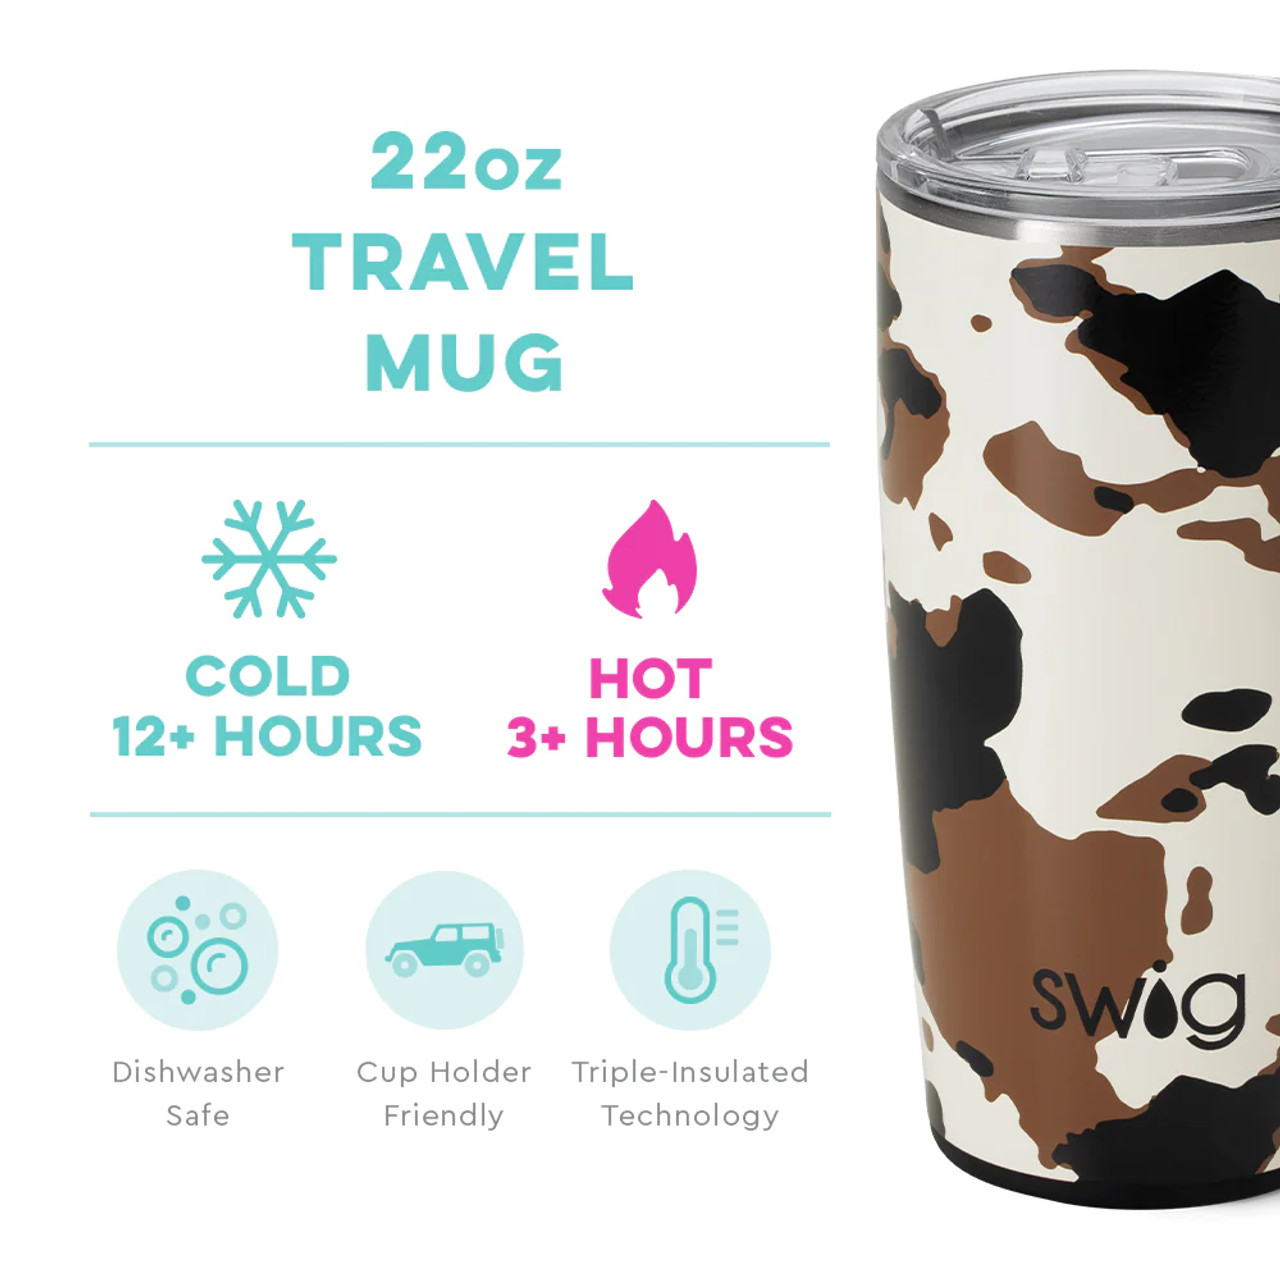 https://cdn11.bigcommerce.com/s-d4i7gnheo/images/stencil/1280x1280/products/17326/26916/swig-life-signature-22oz-insulated-stainless-steel-travel-mug-with-handle-hayride-print-temp-info__34218.1692713118.jpg?c=2